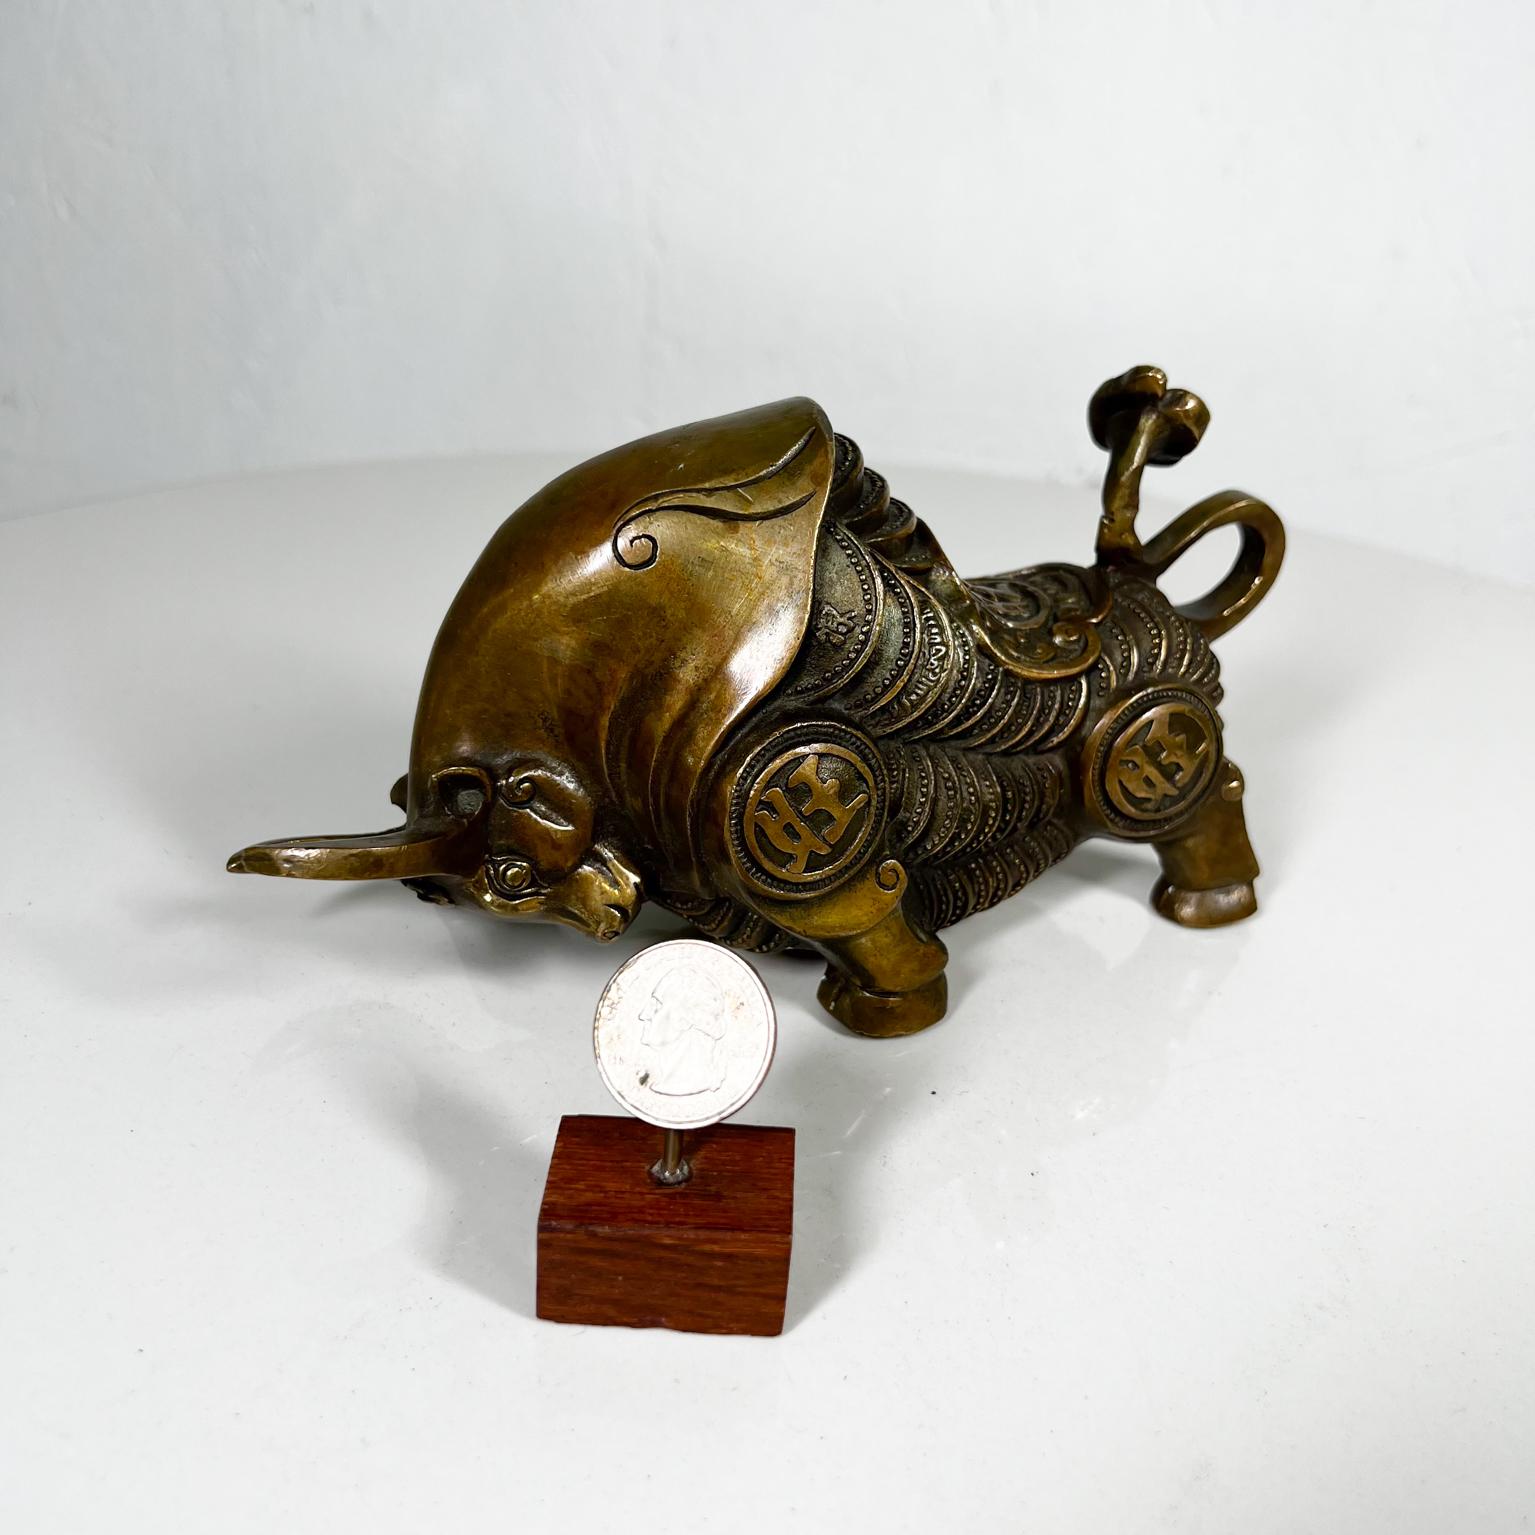 Bronze Asian Bull Sculpture
Feng shui Gilt Bronze Stock Market Bull Wealth Money Ox
8 d x 3 w x 3.88 tall
Preowned vintage
Review images.